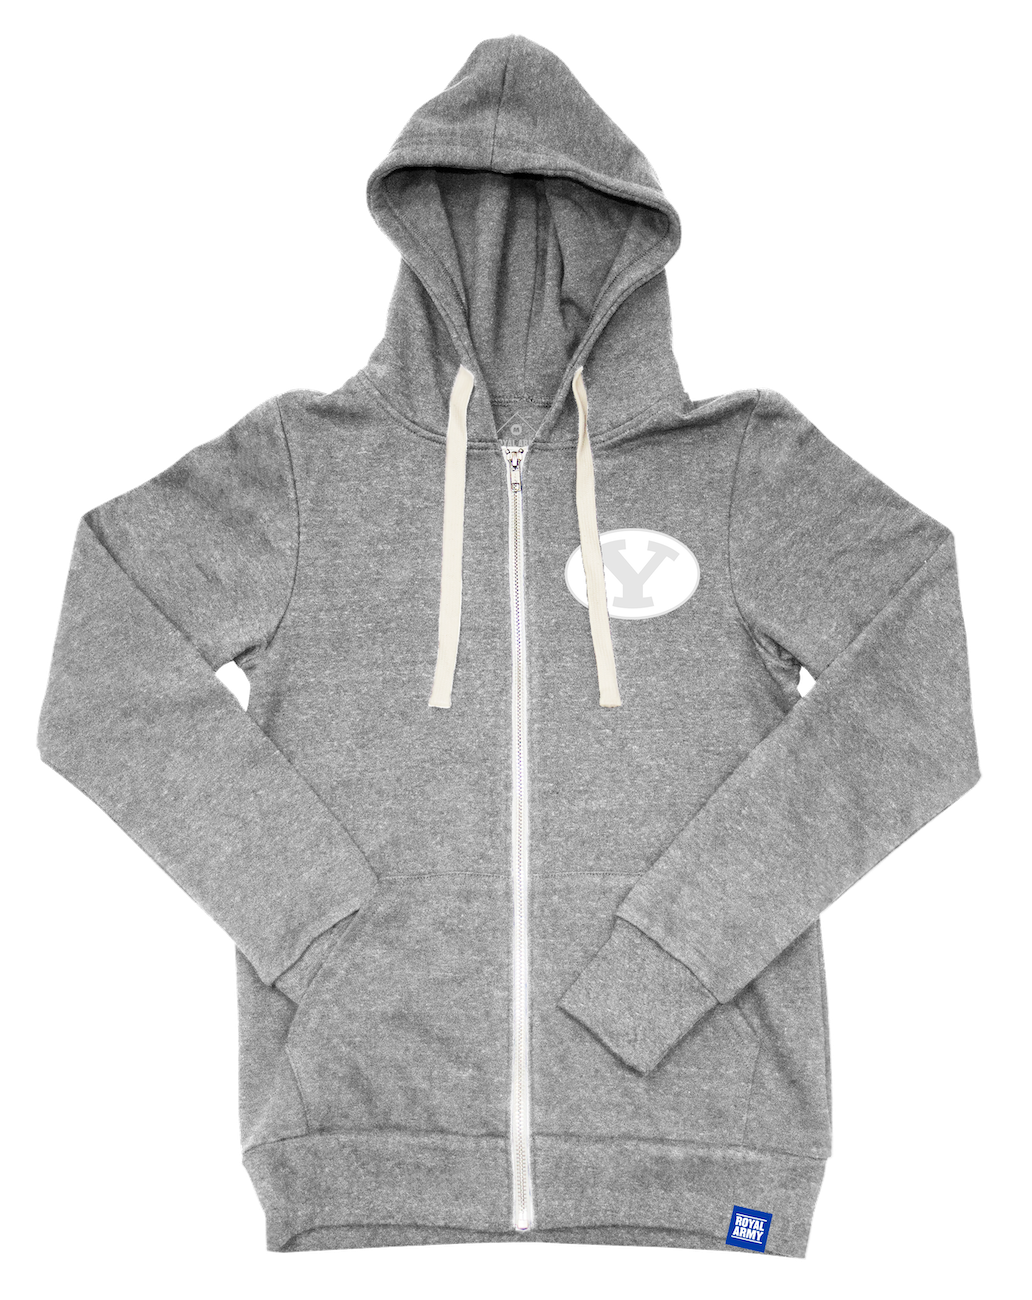 Soft Full-zip Fleece with Custom White on White Stretch Y Patch